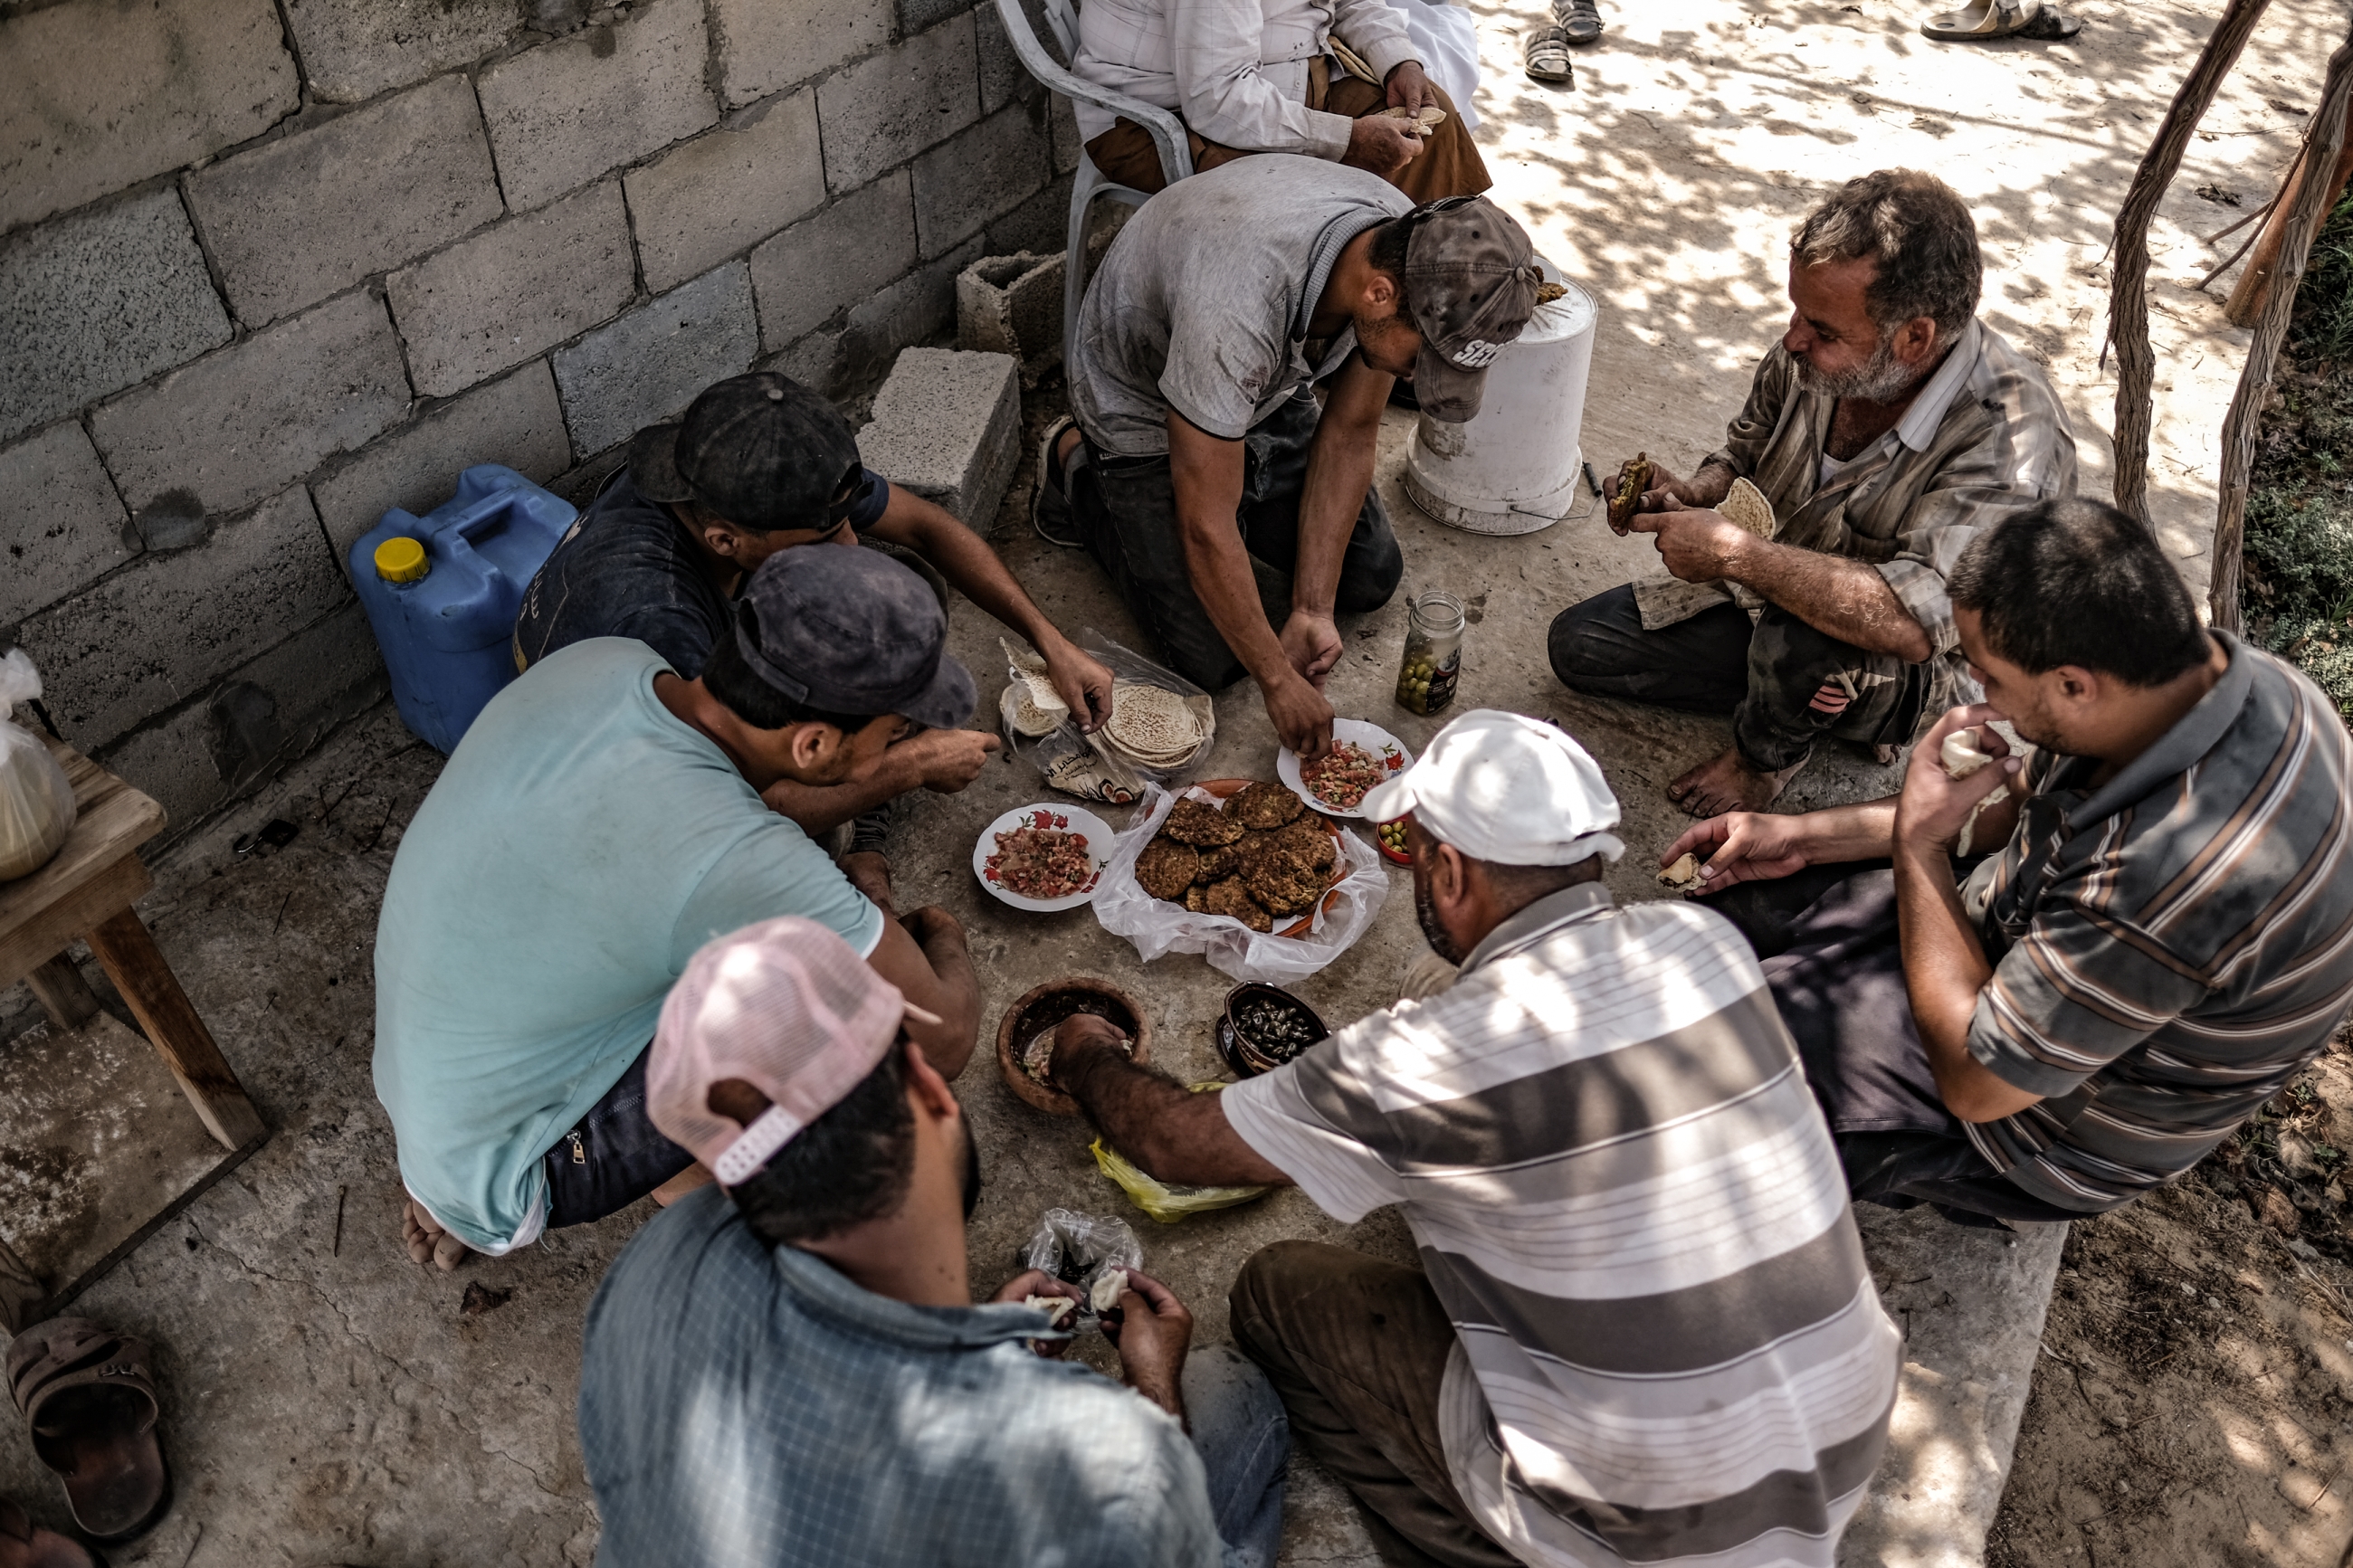 Workers gather to eat